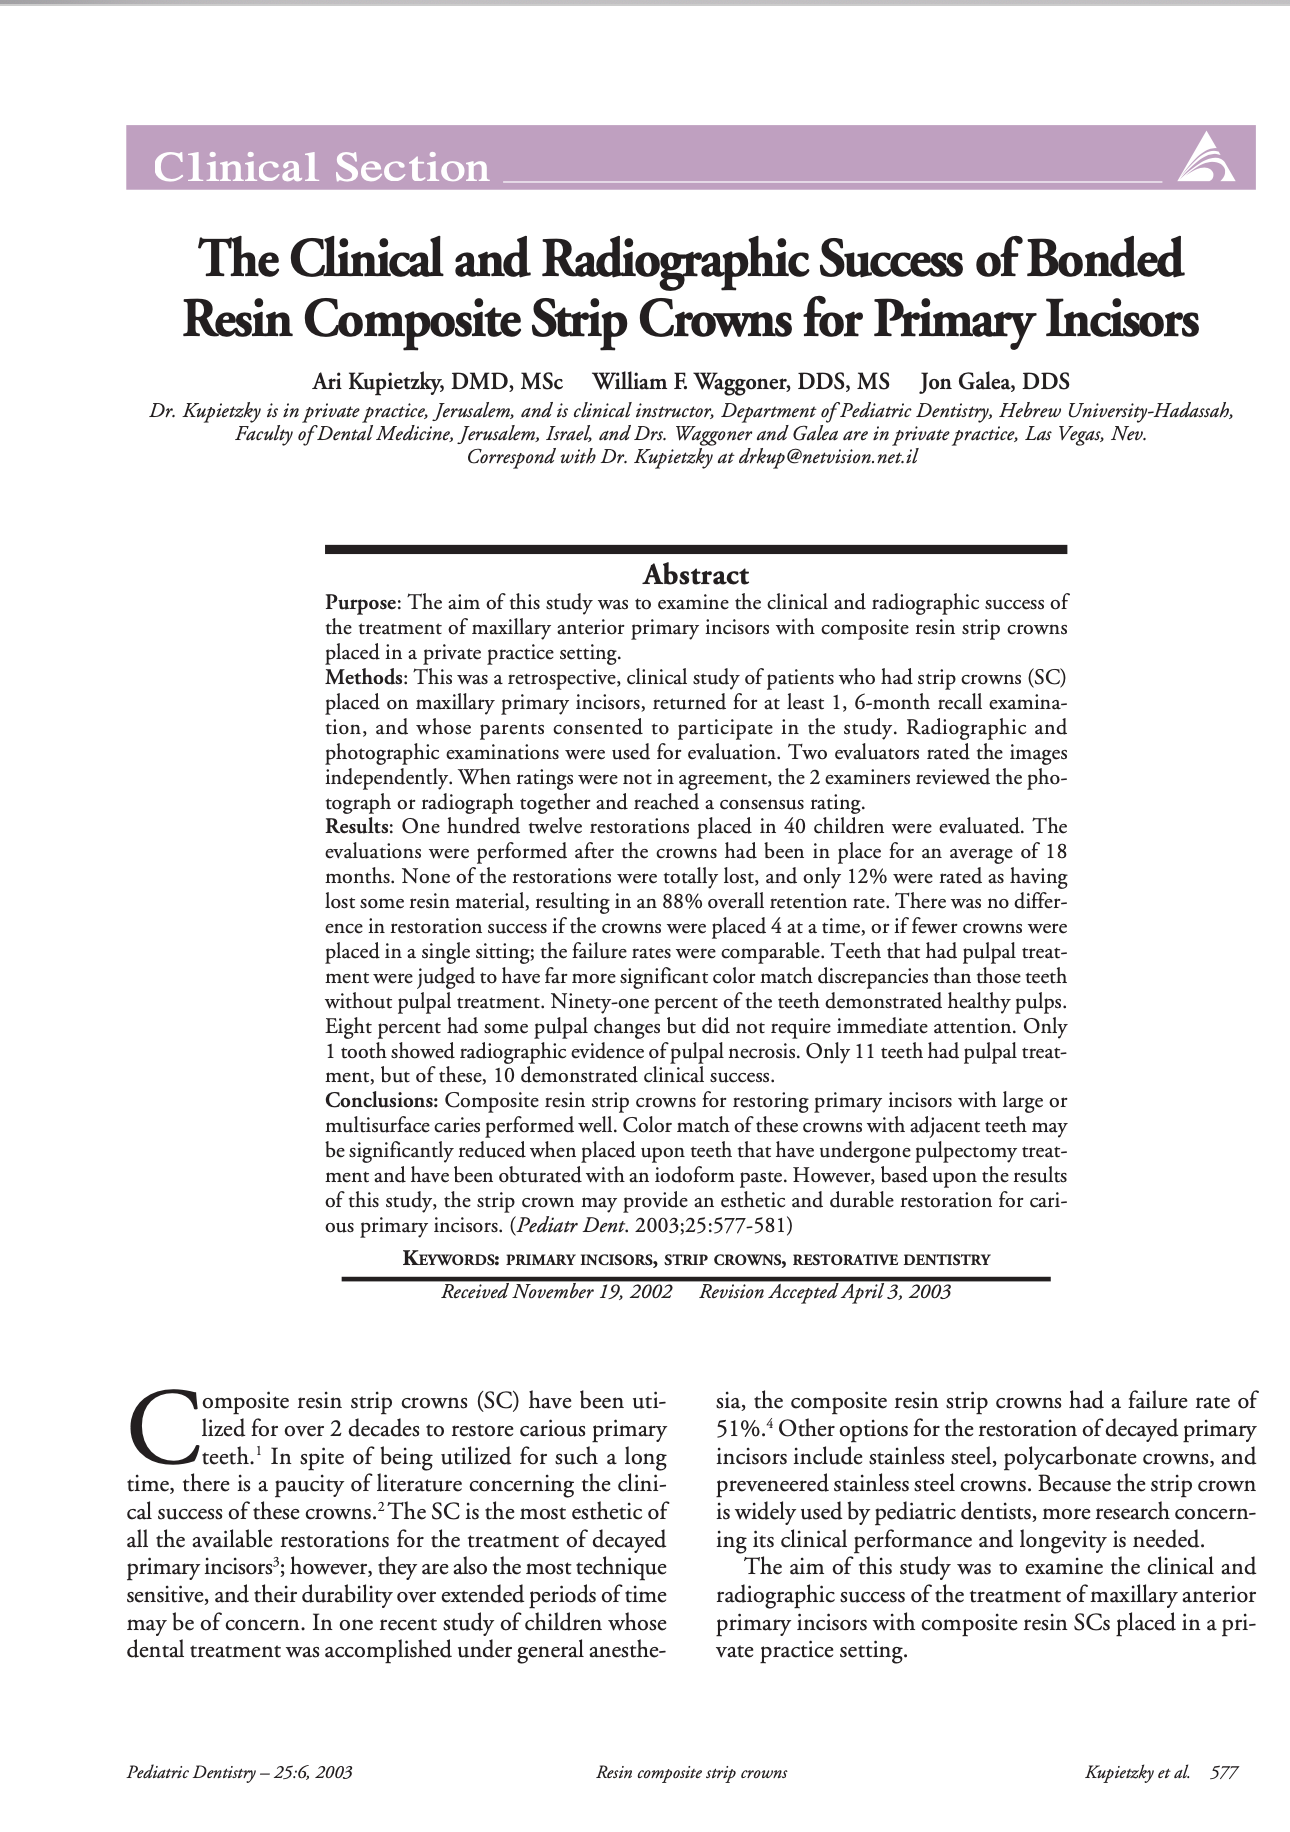 The Clinical and Radiographic Success of Bonded Resin Composite Strip Crowns for Primary Incisors